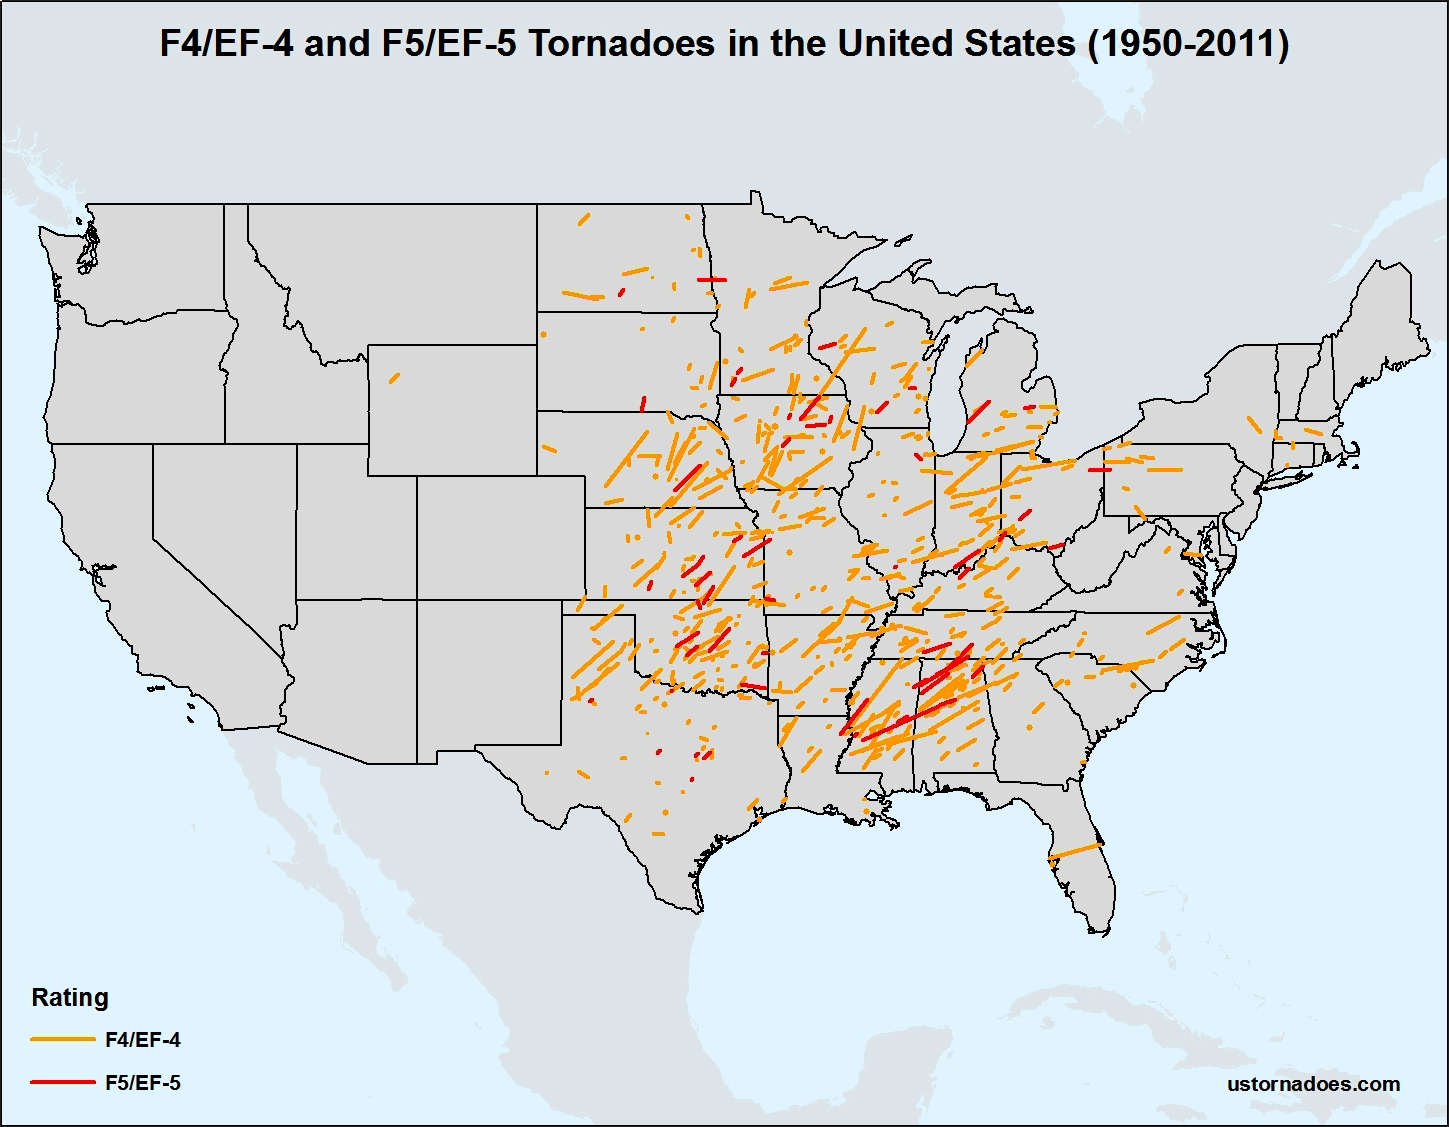 Violent F4/EF4 and F5/EF5 Tornadoes in the United States since 1950